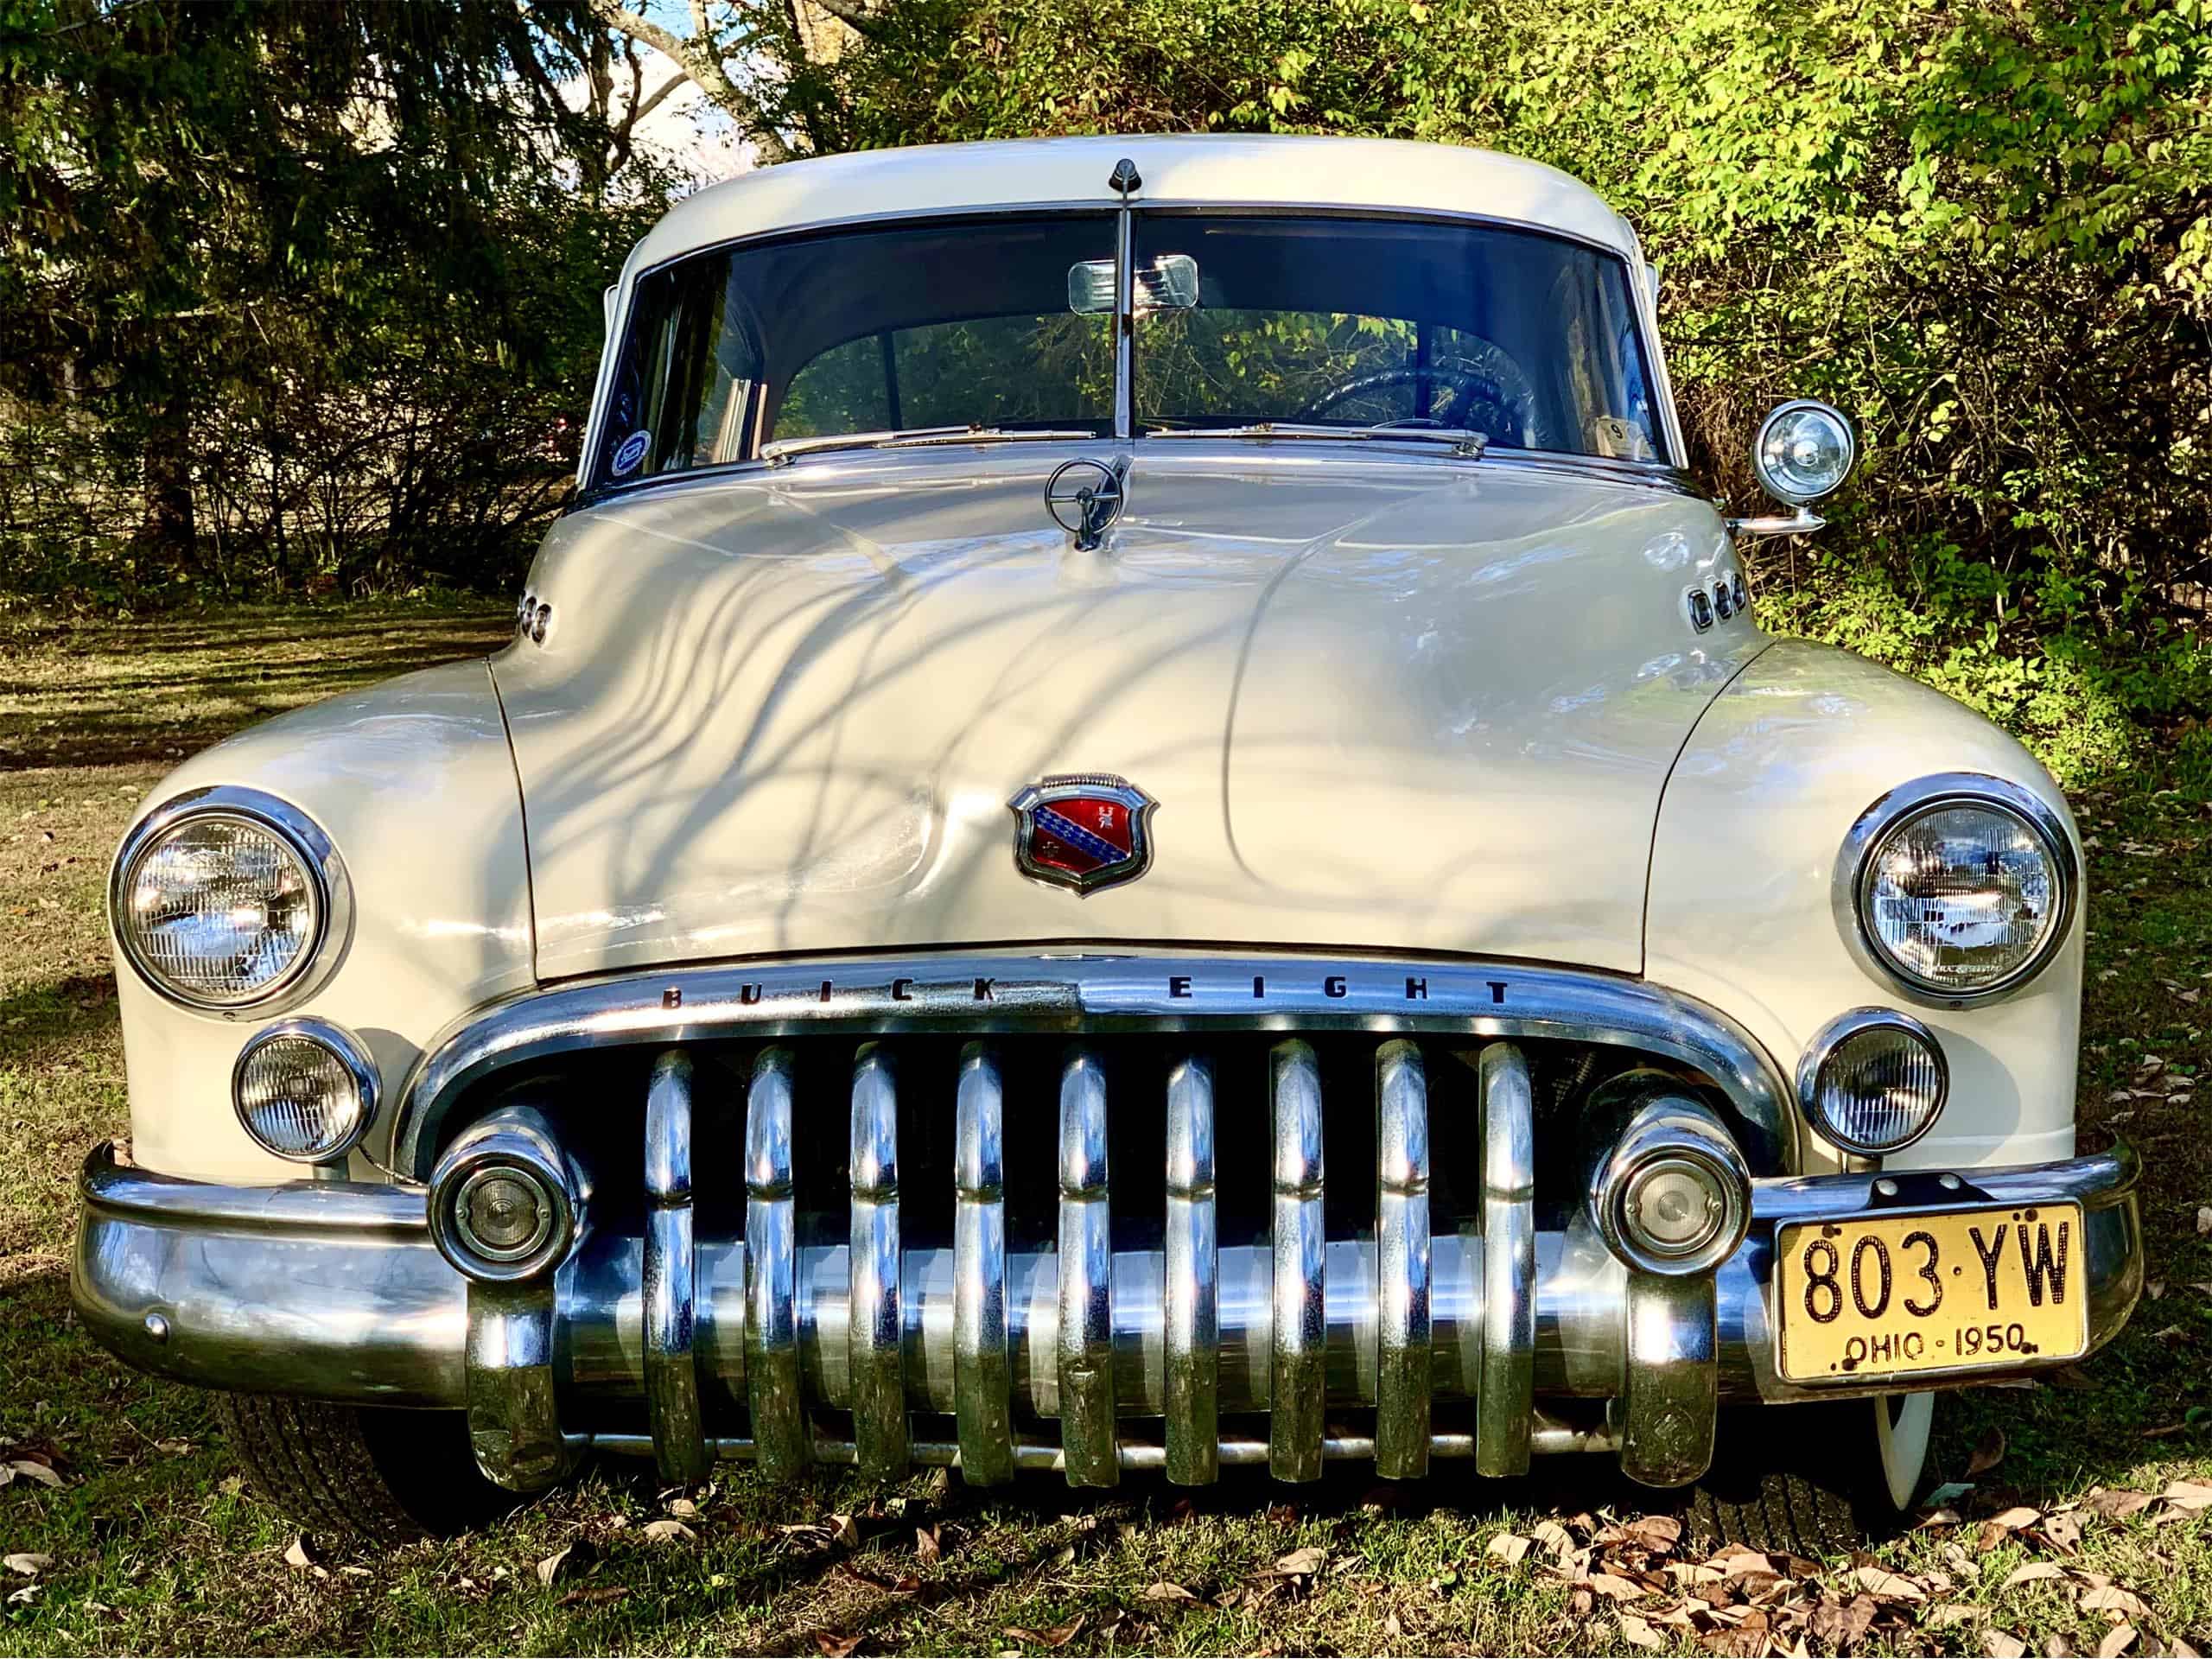 1950 Buick Special, After 30 years, family ready to sell 1950 Buick Special sedan, ClassicCars.com Journal